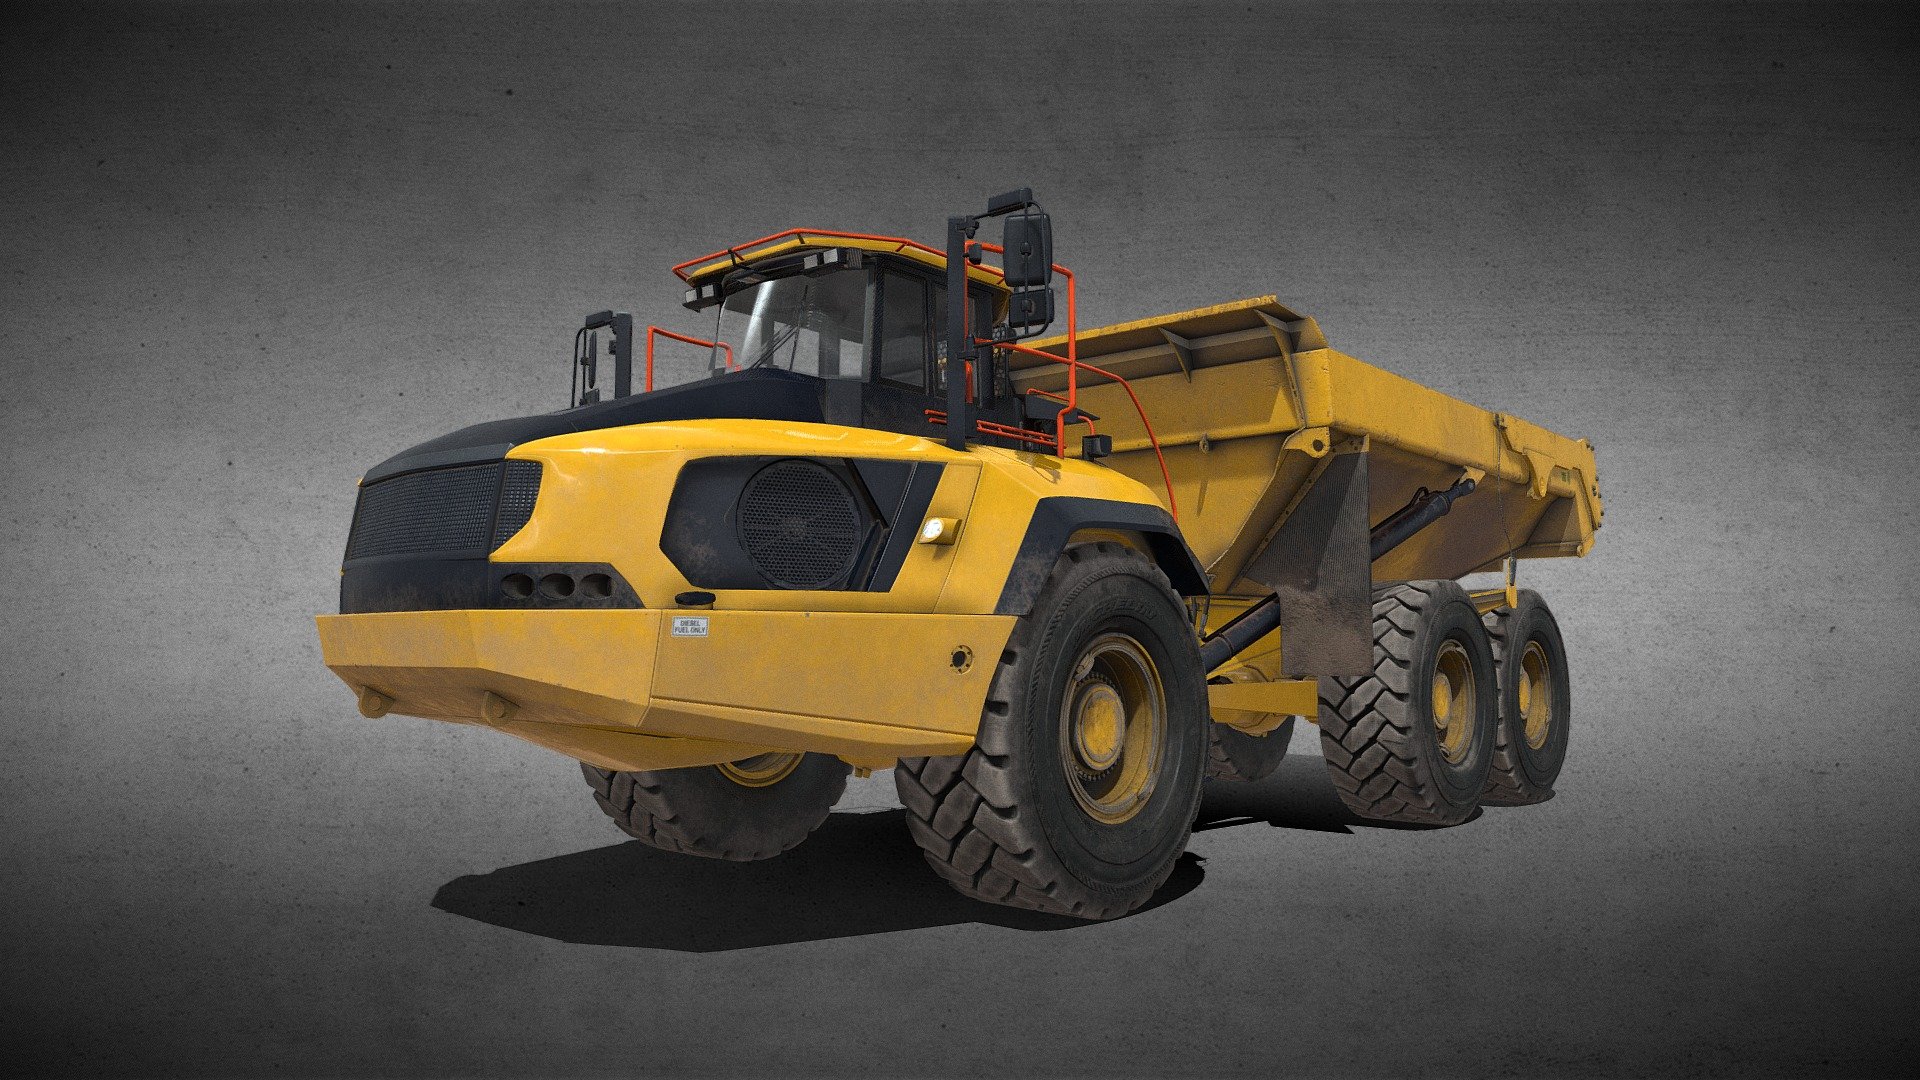 Articulated Dump Truck model made in maya

Contains UV’d model, skeleton with NO RIGGING. Cables should retain skinning. Textures in 2k and 4k

484103 tris

9 materials, 5 textures each

PBR textures: BaseColor, Normal,  Roughness, Metal, AO

tiff format with alphas where needed on the front, stairs grating, interior, and the cab windows

Unreal

9 materials, 3 textures each: BaseColor, Normal, Packed (Occlusion, Roughness, Metallic - Articulated Dump Truck - Buy Royalty Free 3D model by Phil Rivera (@philrivera) 3d model